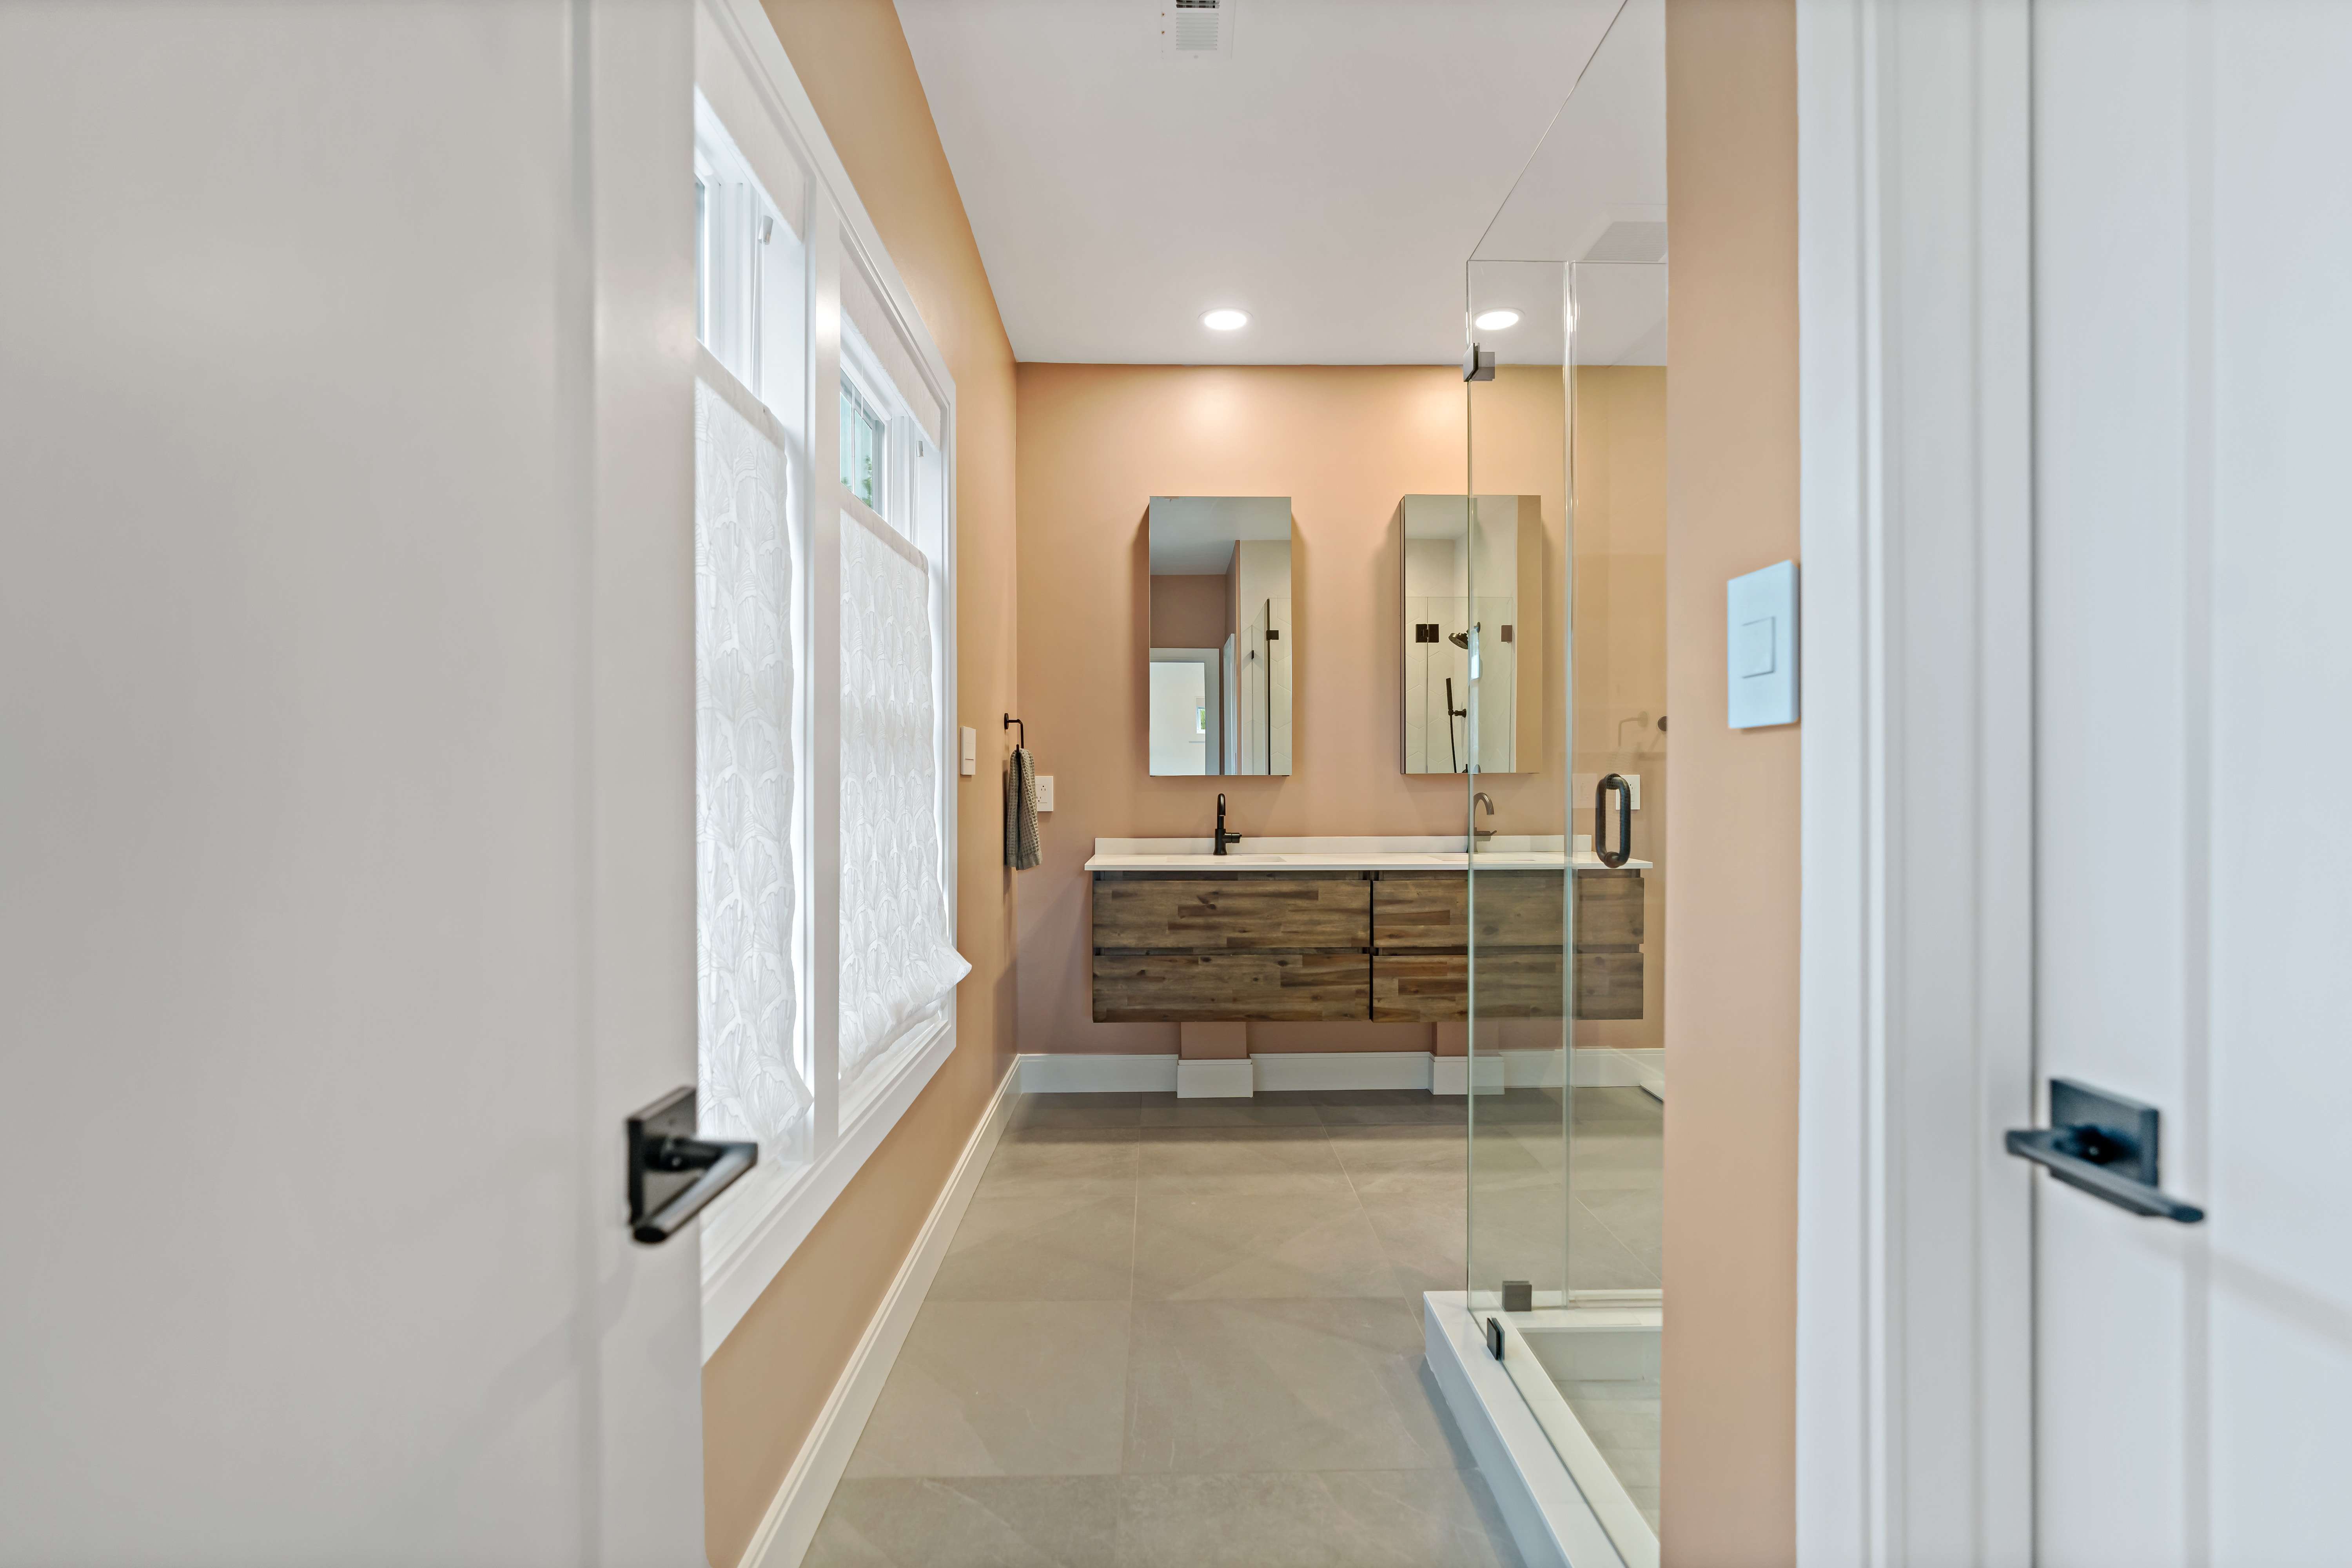 Entryway to bathroom with double sinks and orange walls